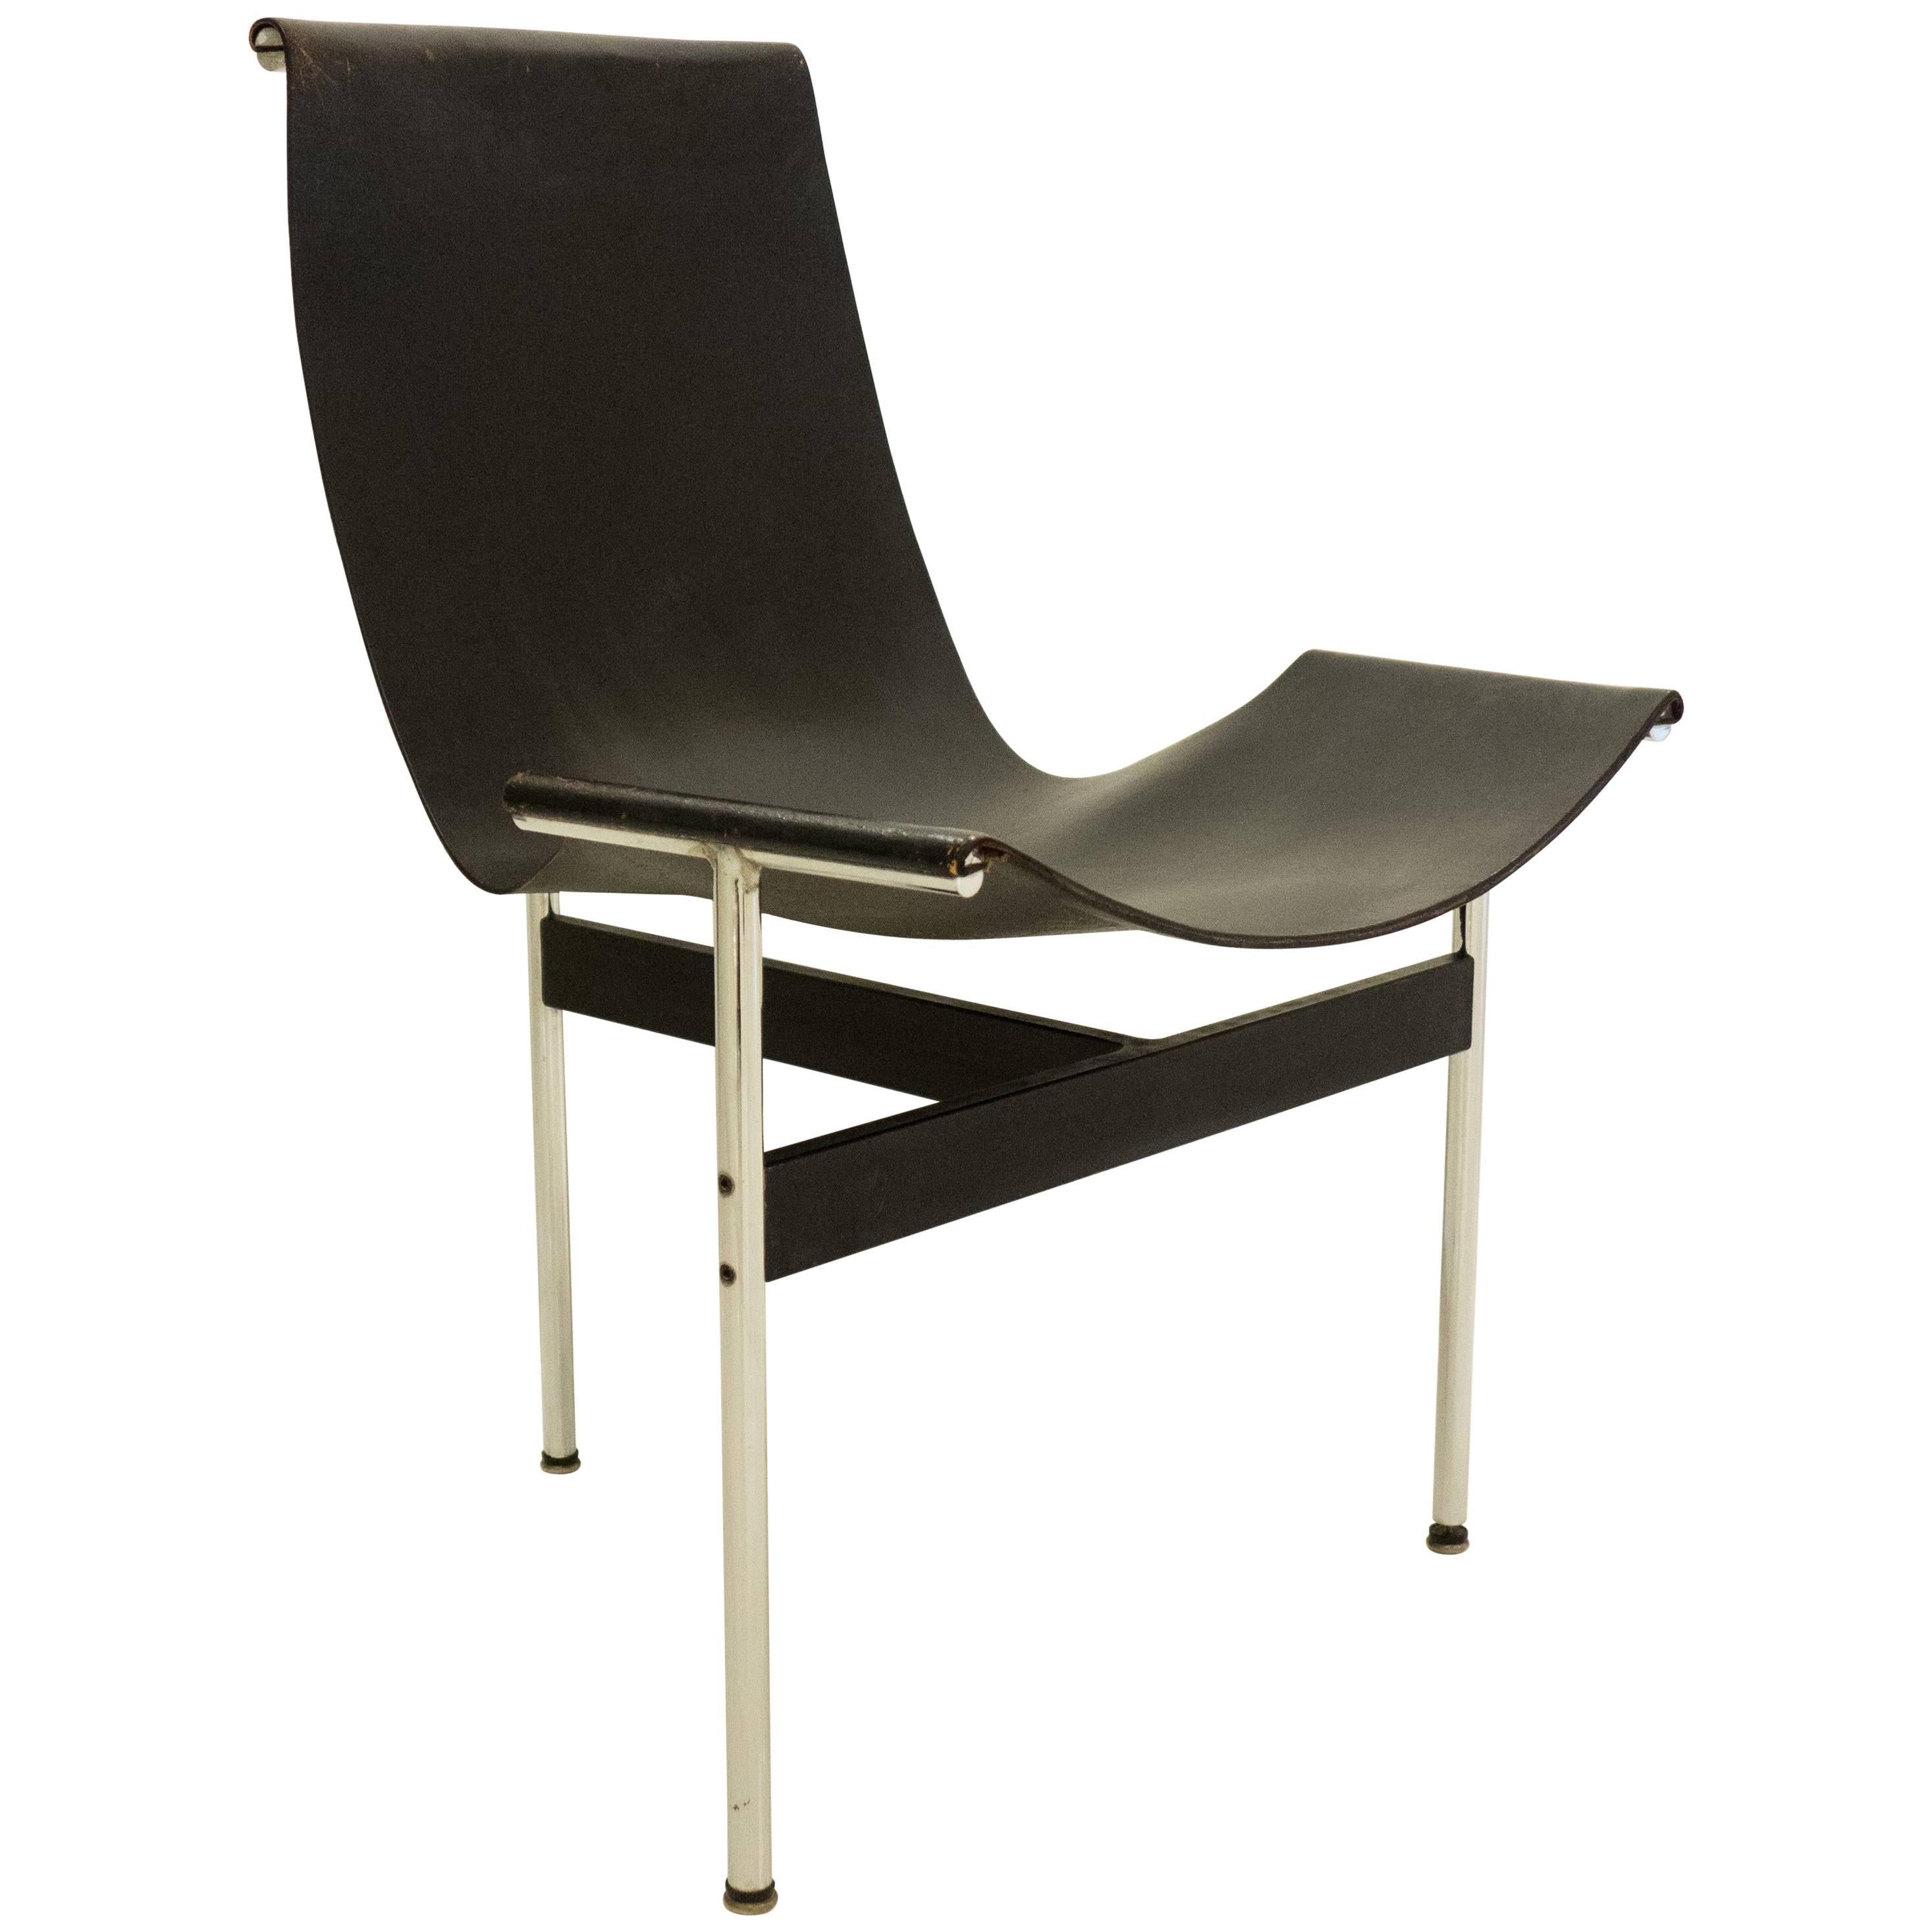 Early Laverne T-Chair by Katavolos, Littell and Kelley